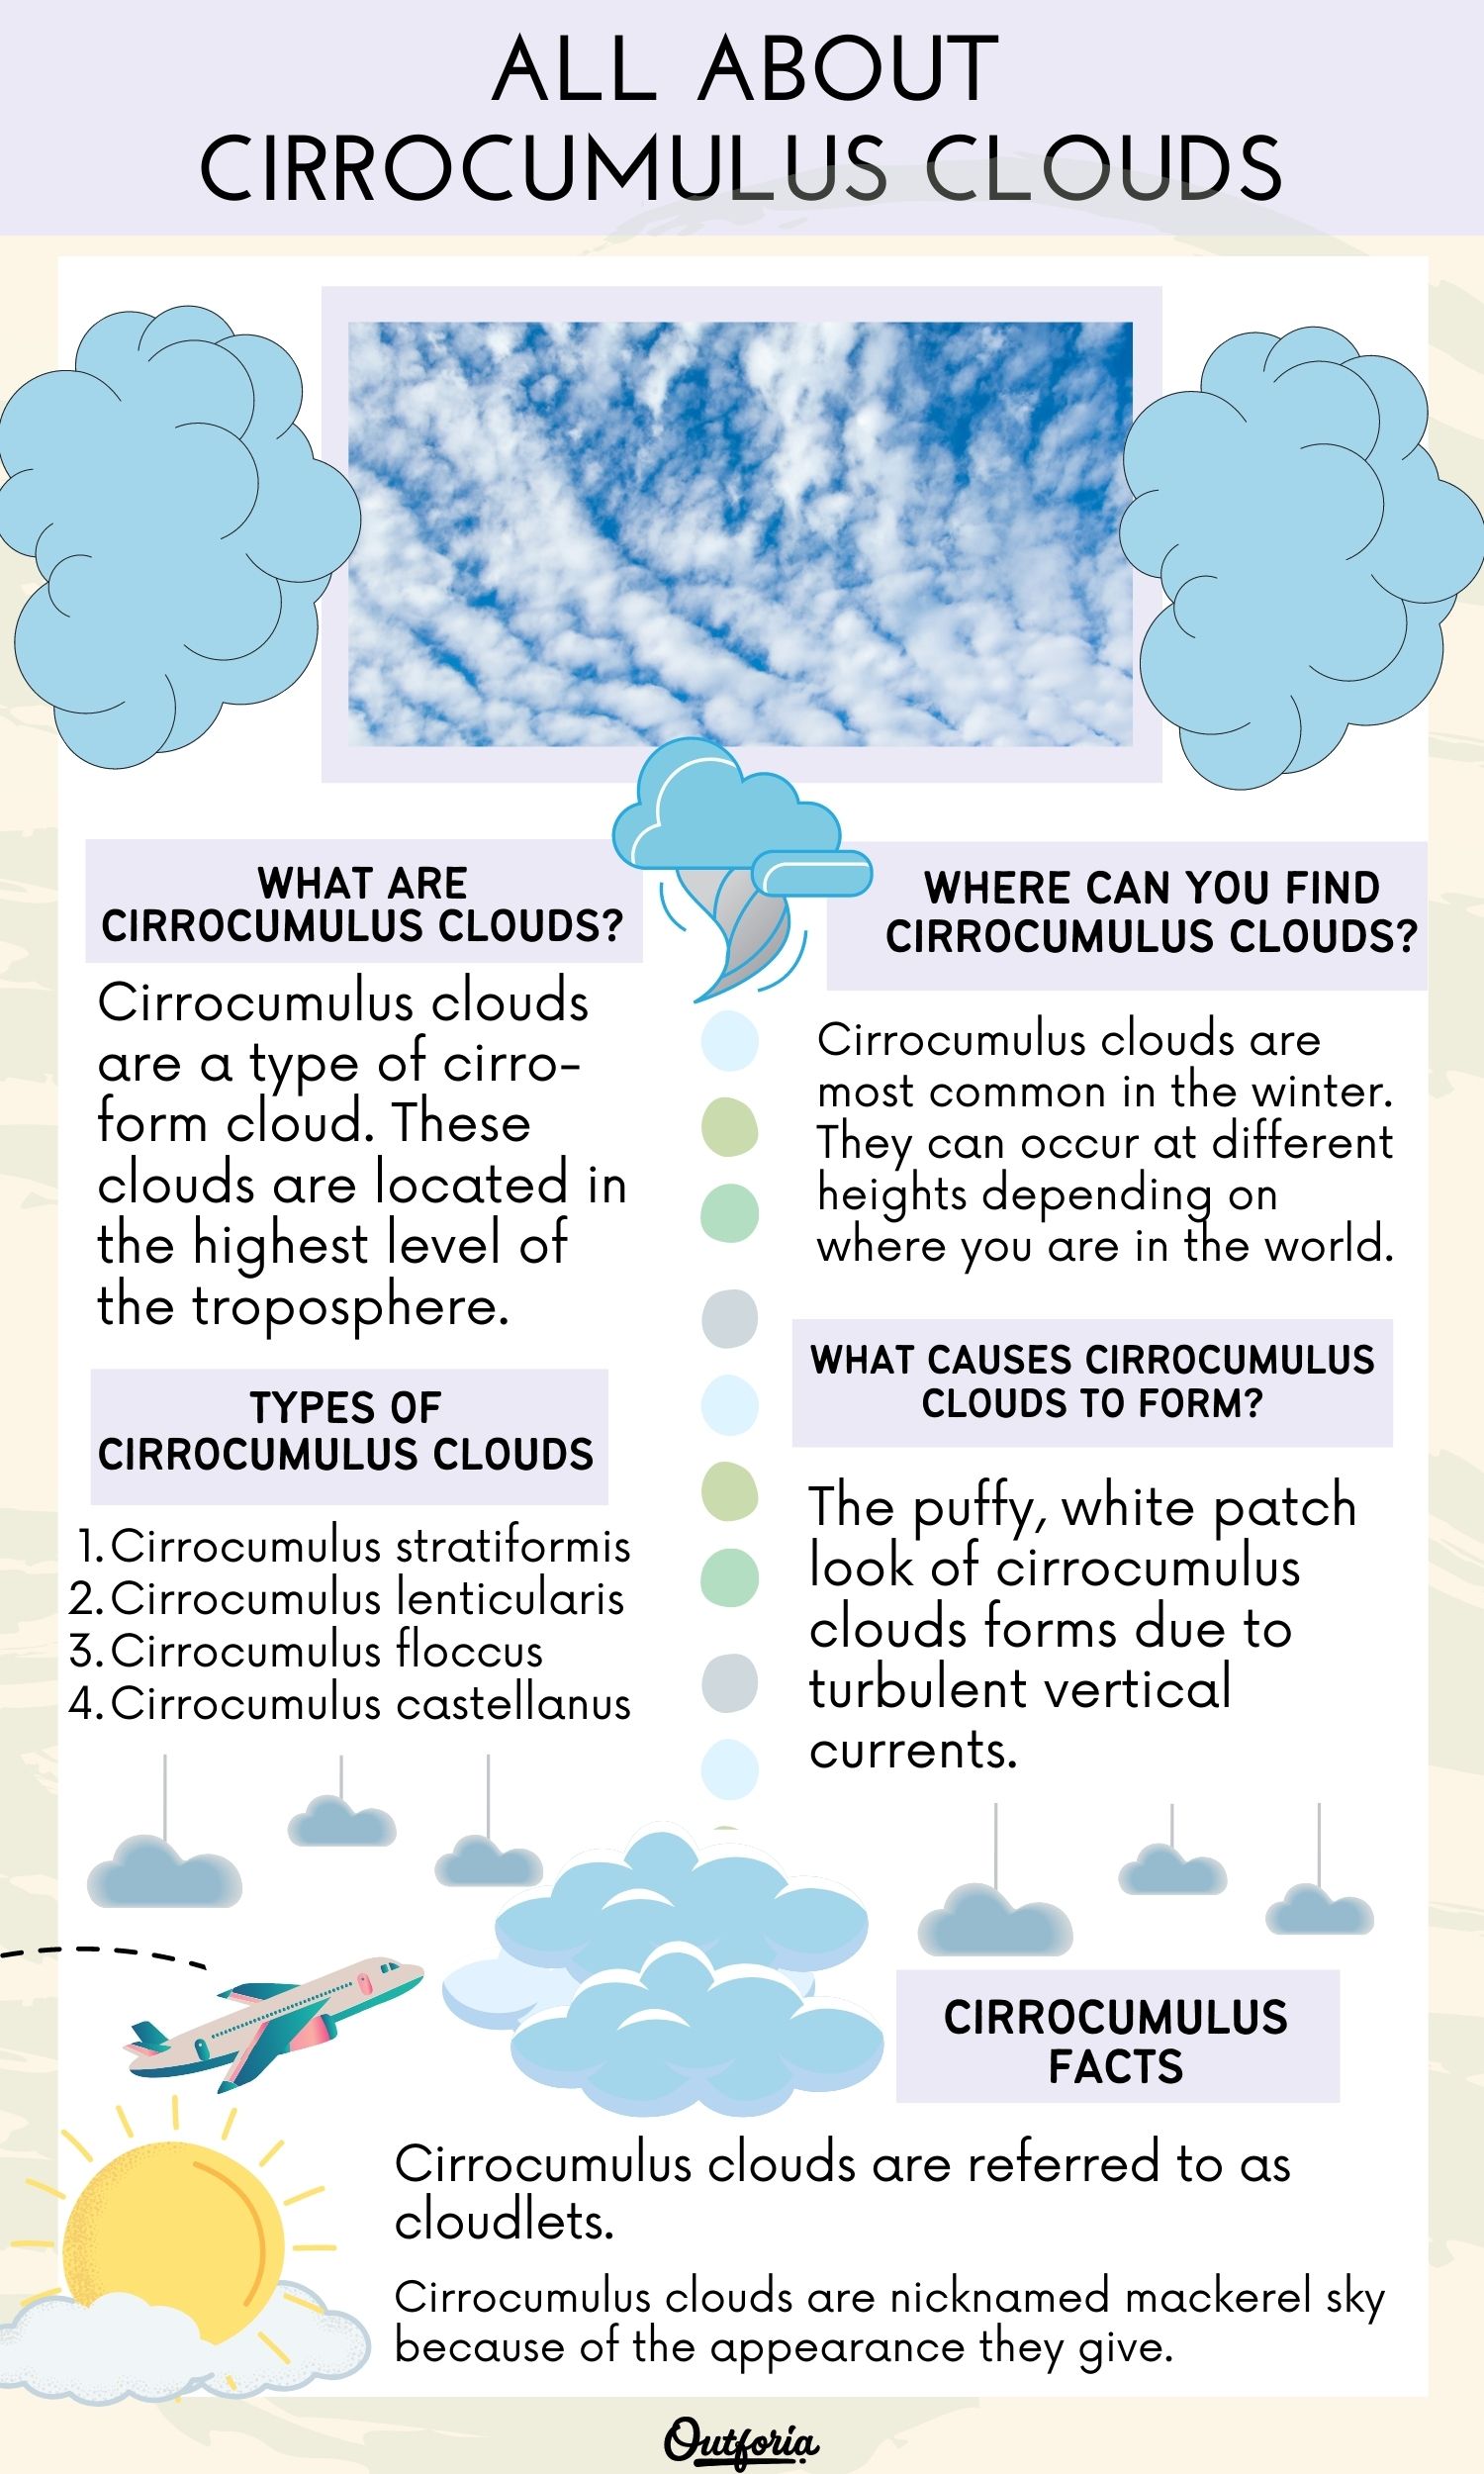 Chart of the cirrocumulus clouds complete with picture, facts, and more